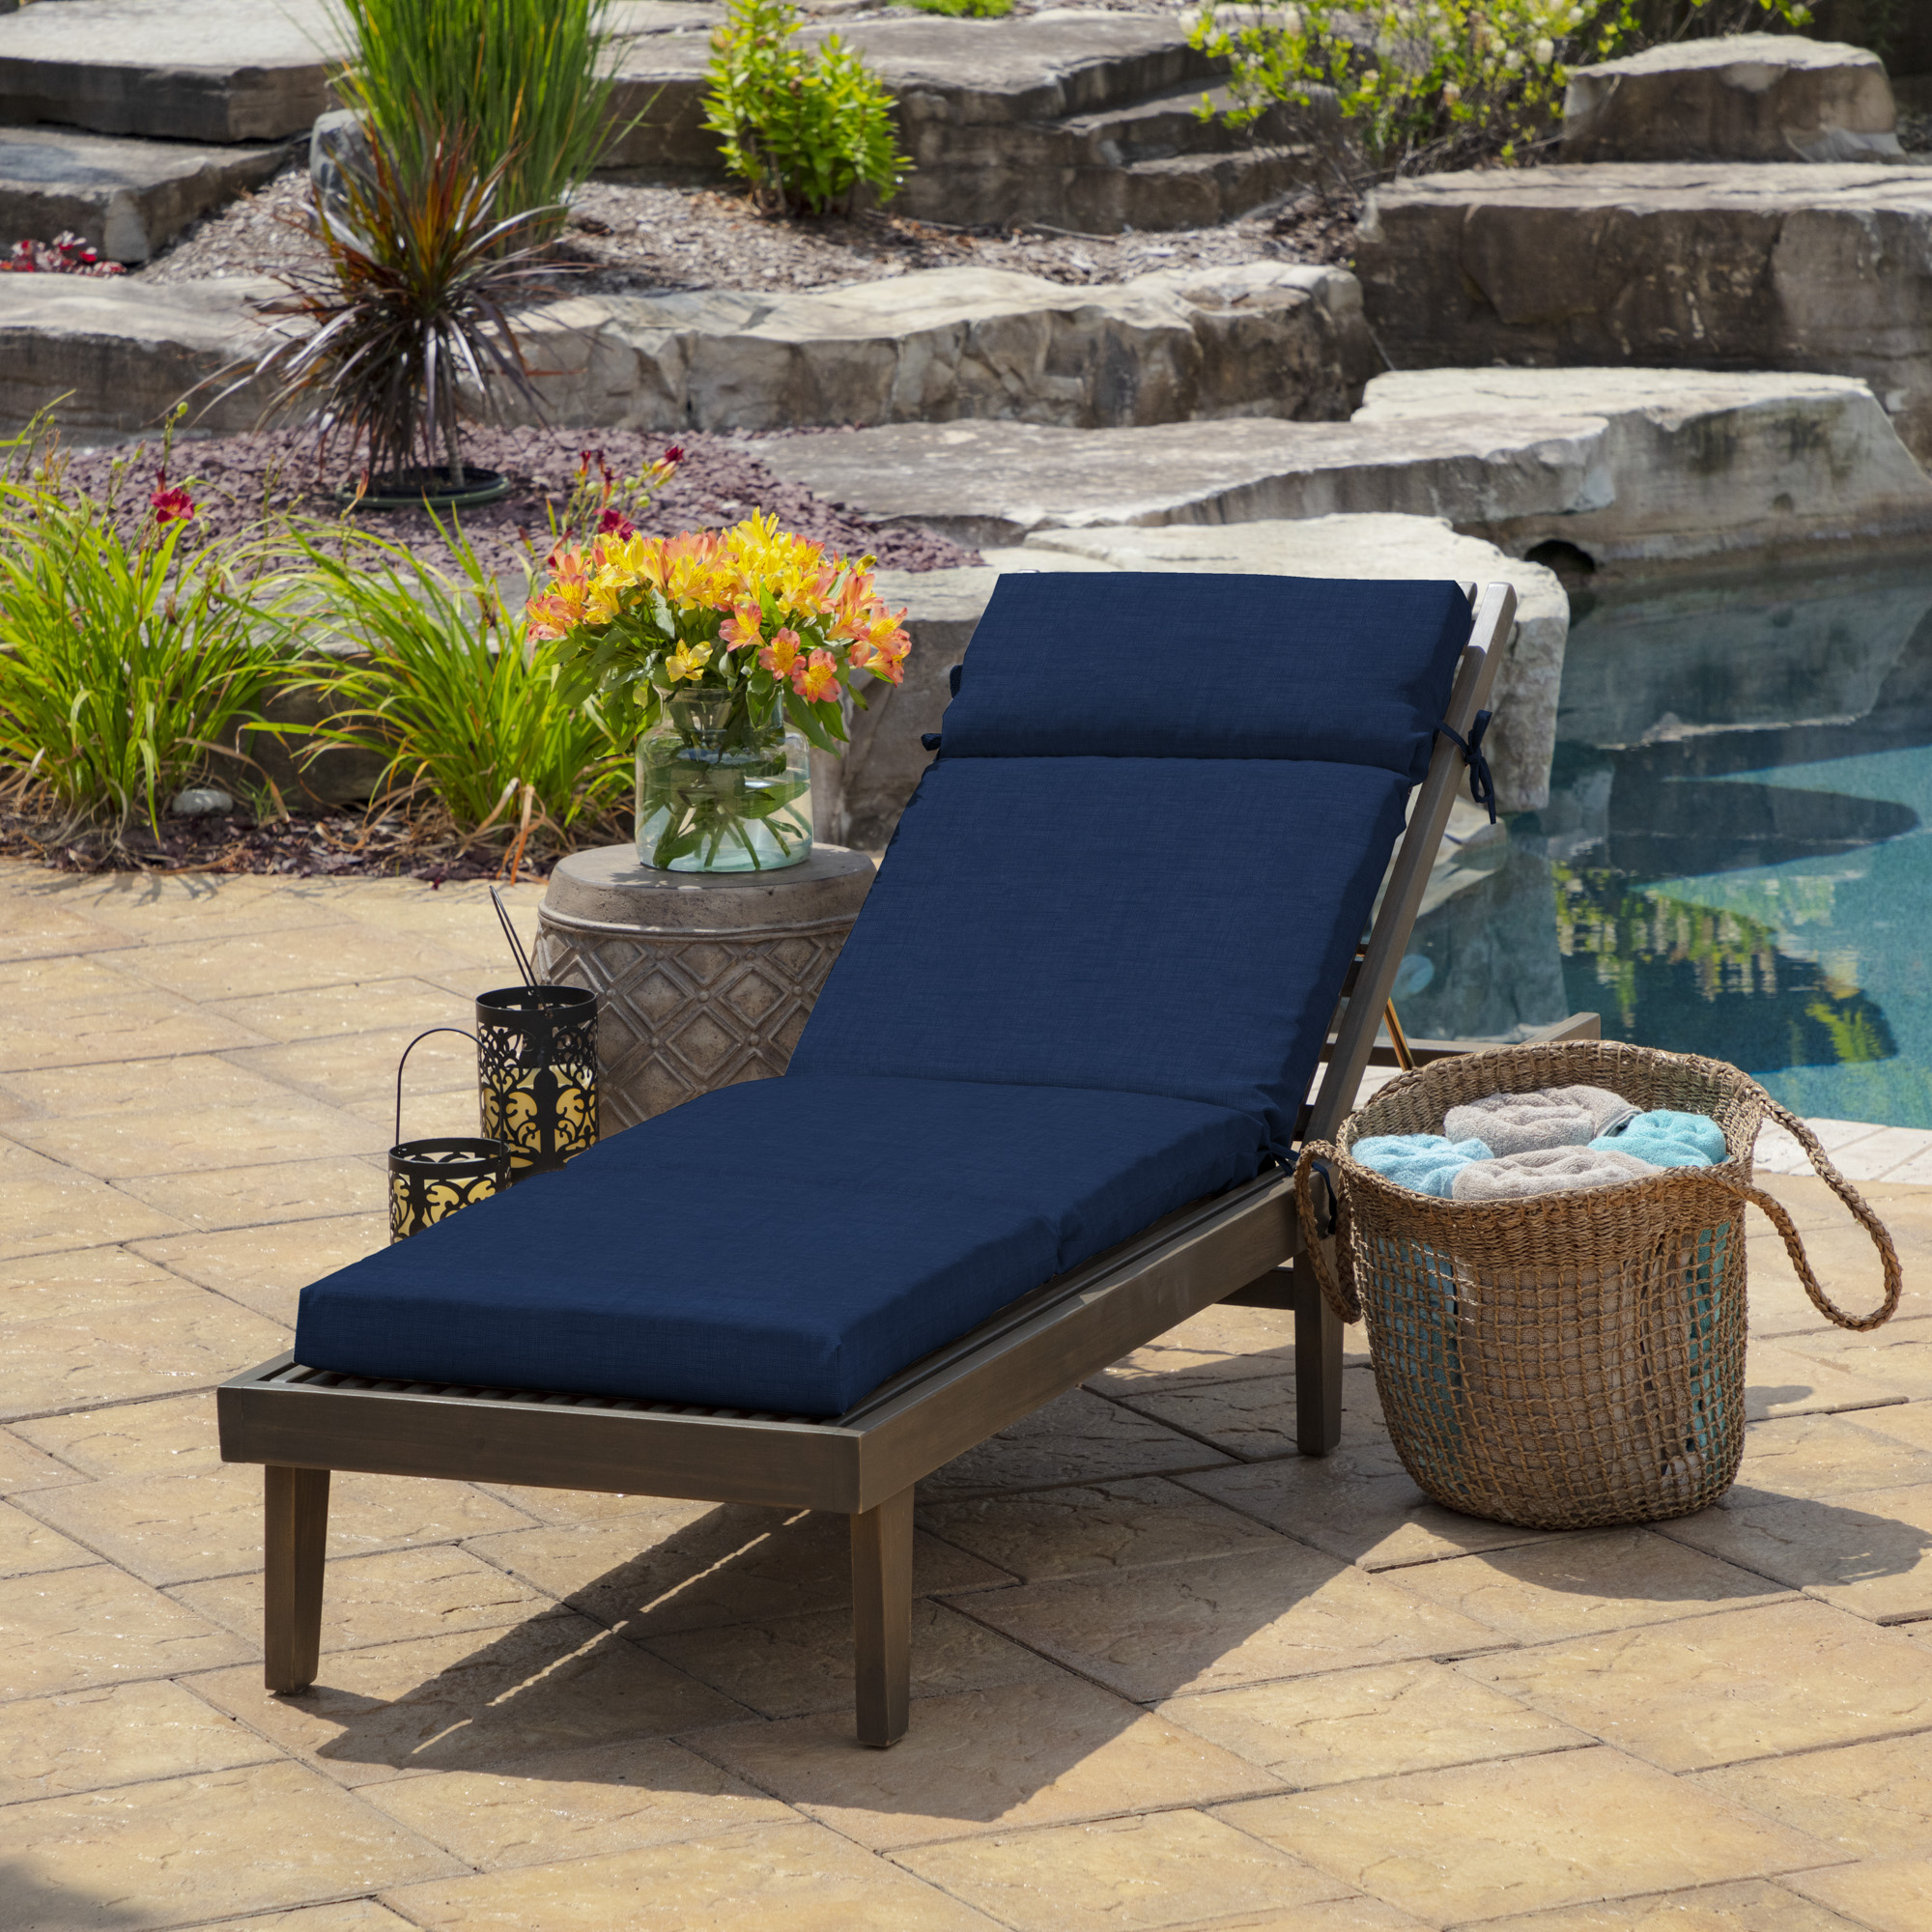 Arden Selections Outdoor Chaise Lounge Cushion 22 x 77, Sapphire Blue Leala - image 3 of 10